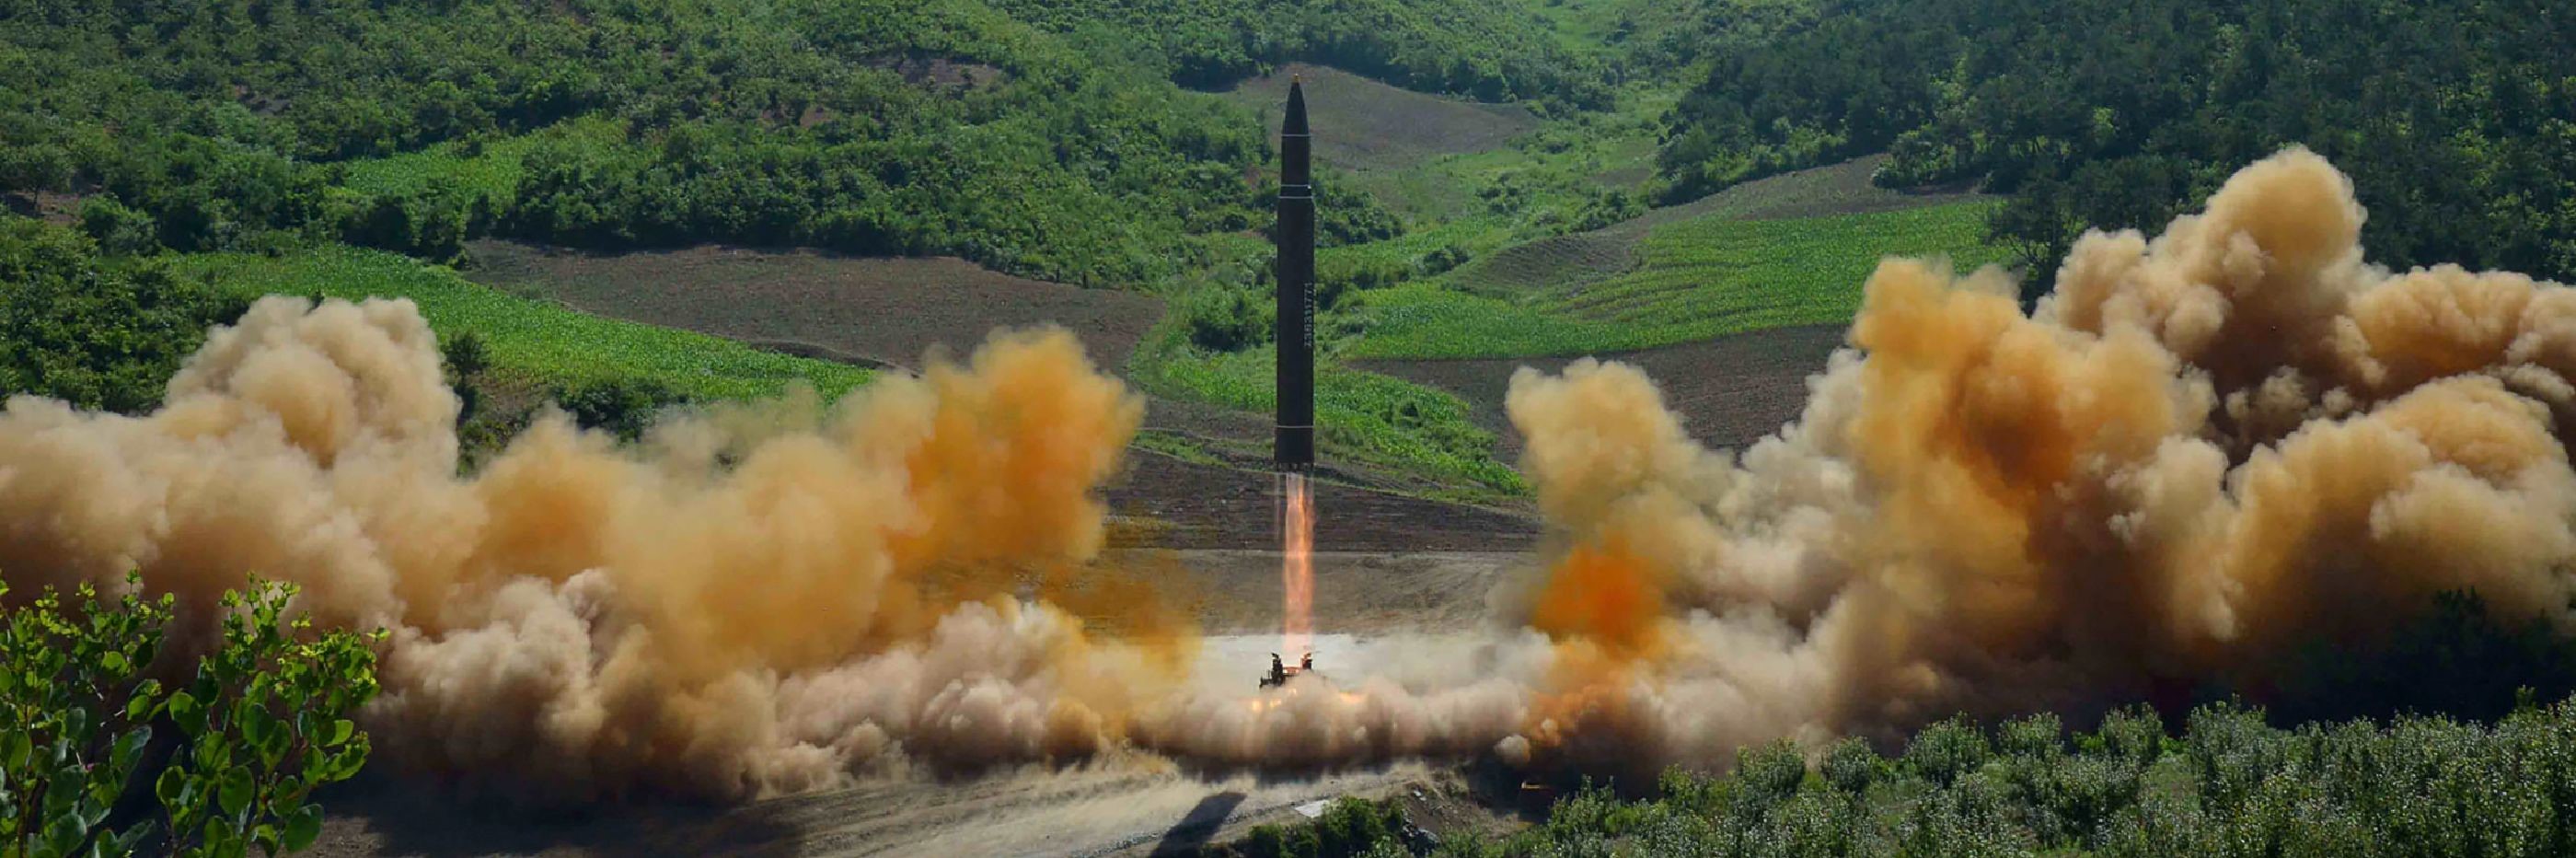 This photograph, released by the Korean Central News Agency in North Korea on 4 June 2017, depicts the test firing of an intercontinental ballistic missile.